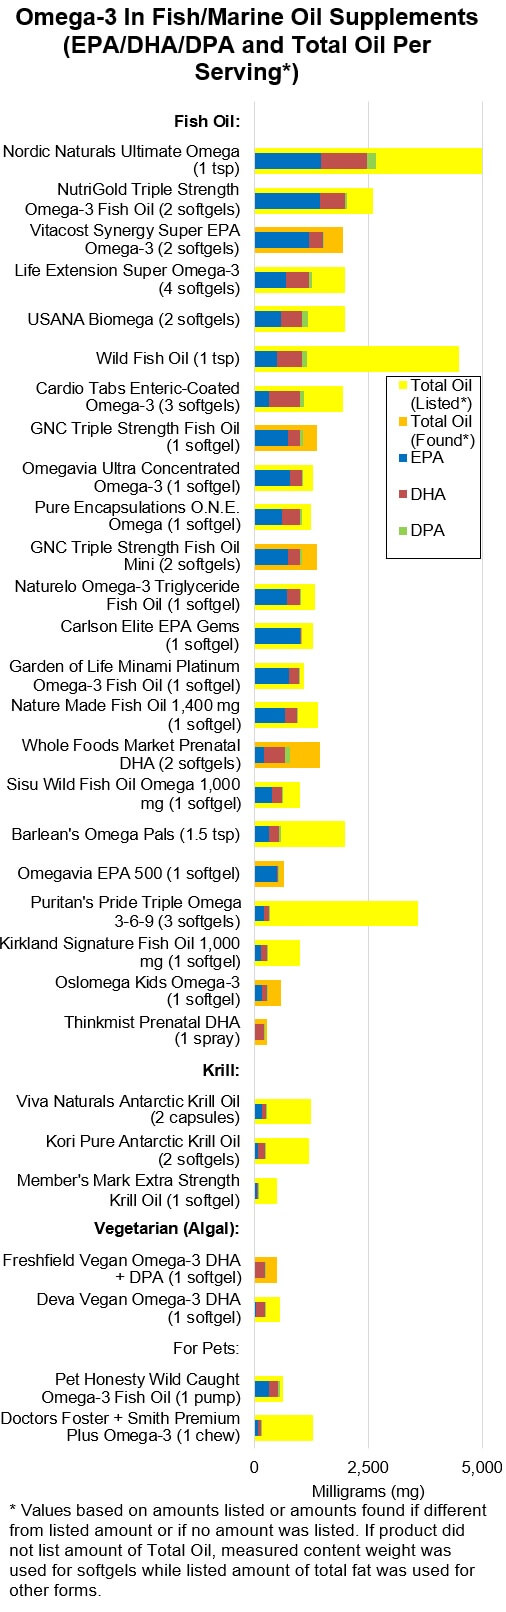 Omega-3s In Fish/Marine Oil Supplements